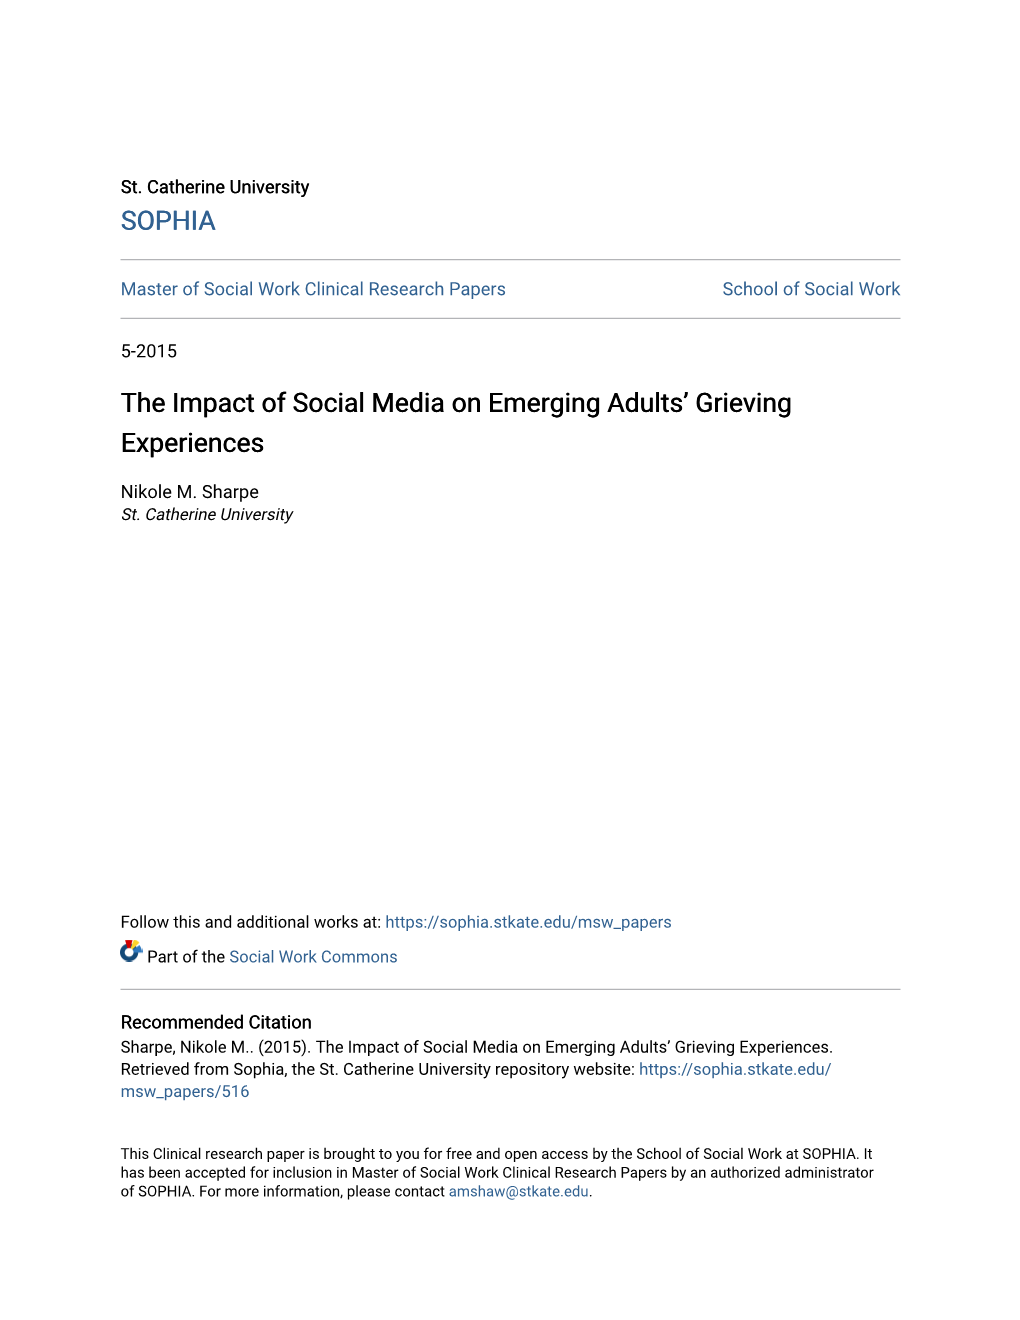 The Impact of Social Media on Emerging Adults' Grieving